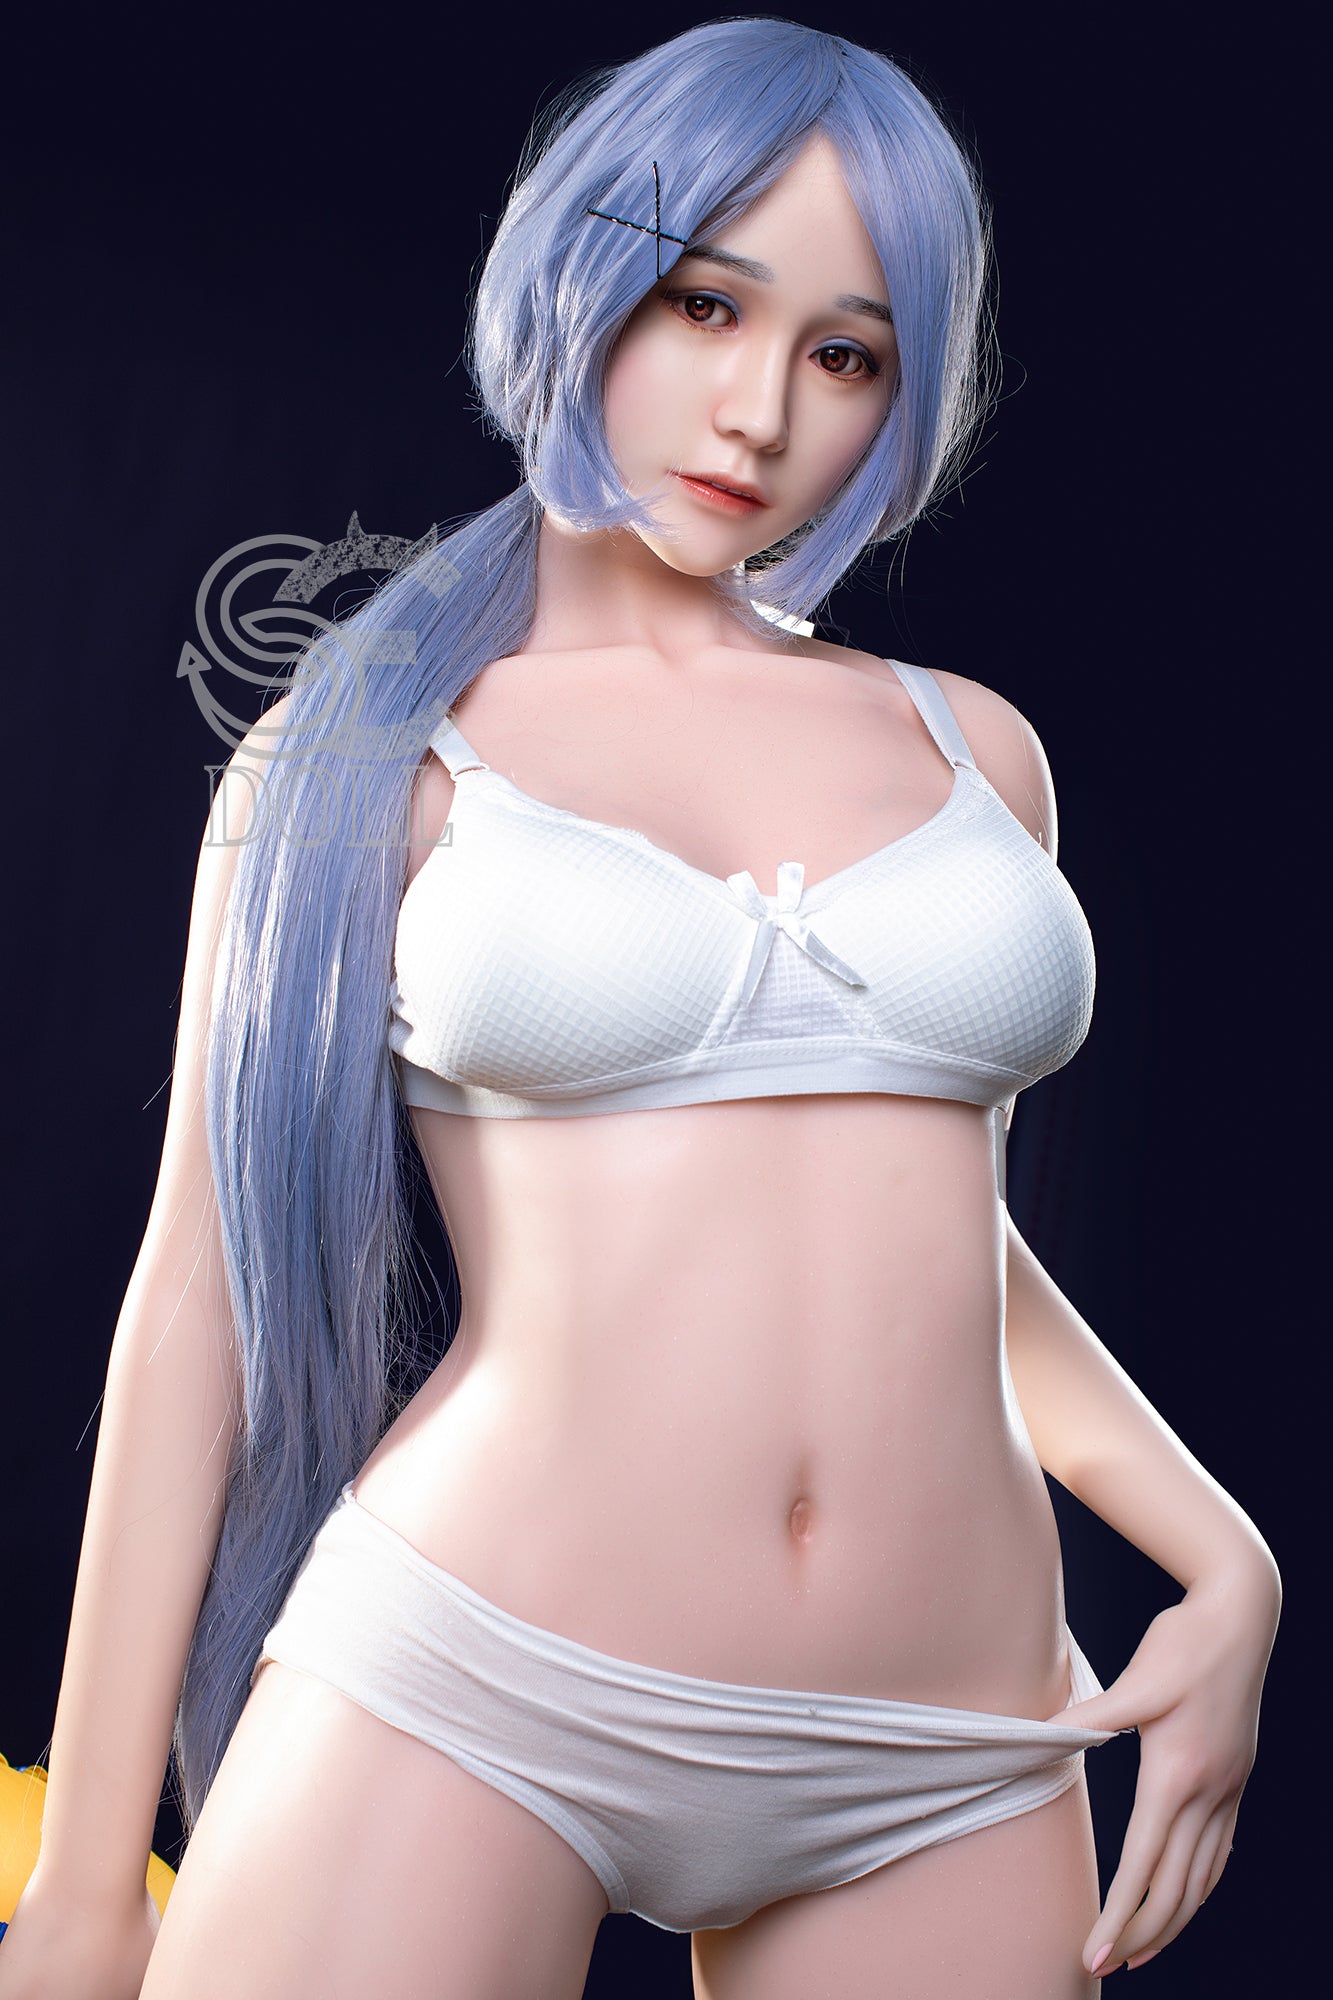 SEDOLL 160 cm C Silicone - Lydia | Buy Sex Dolls at DOLLS ACTUALLY